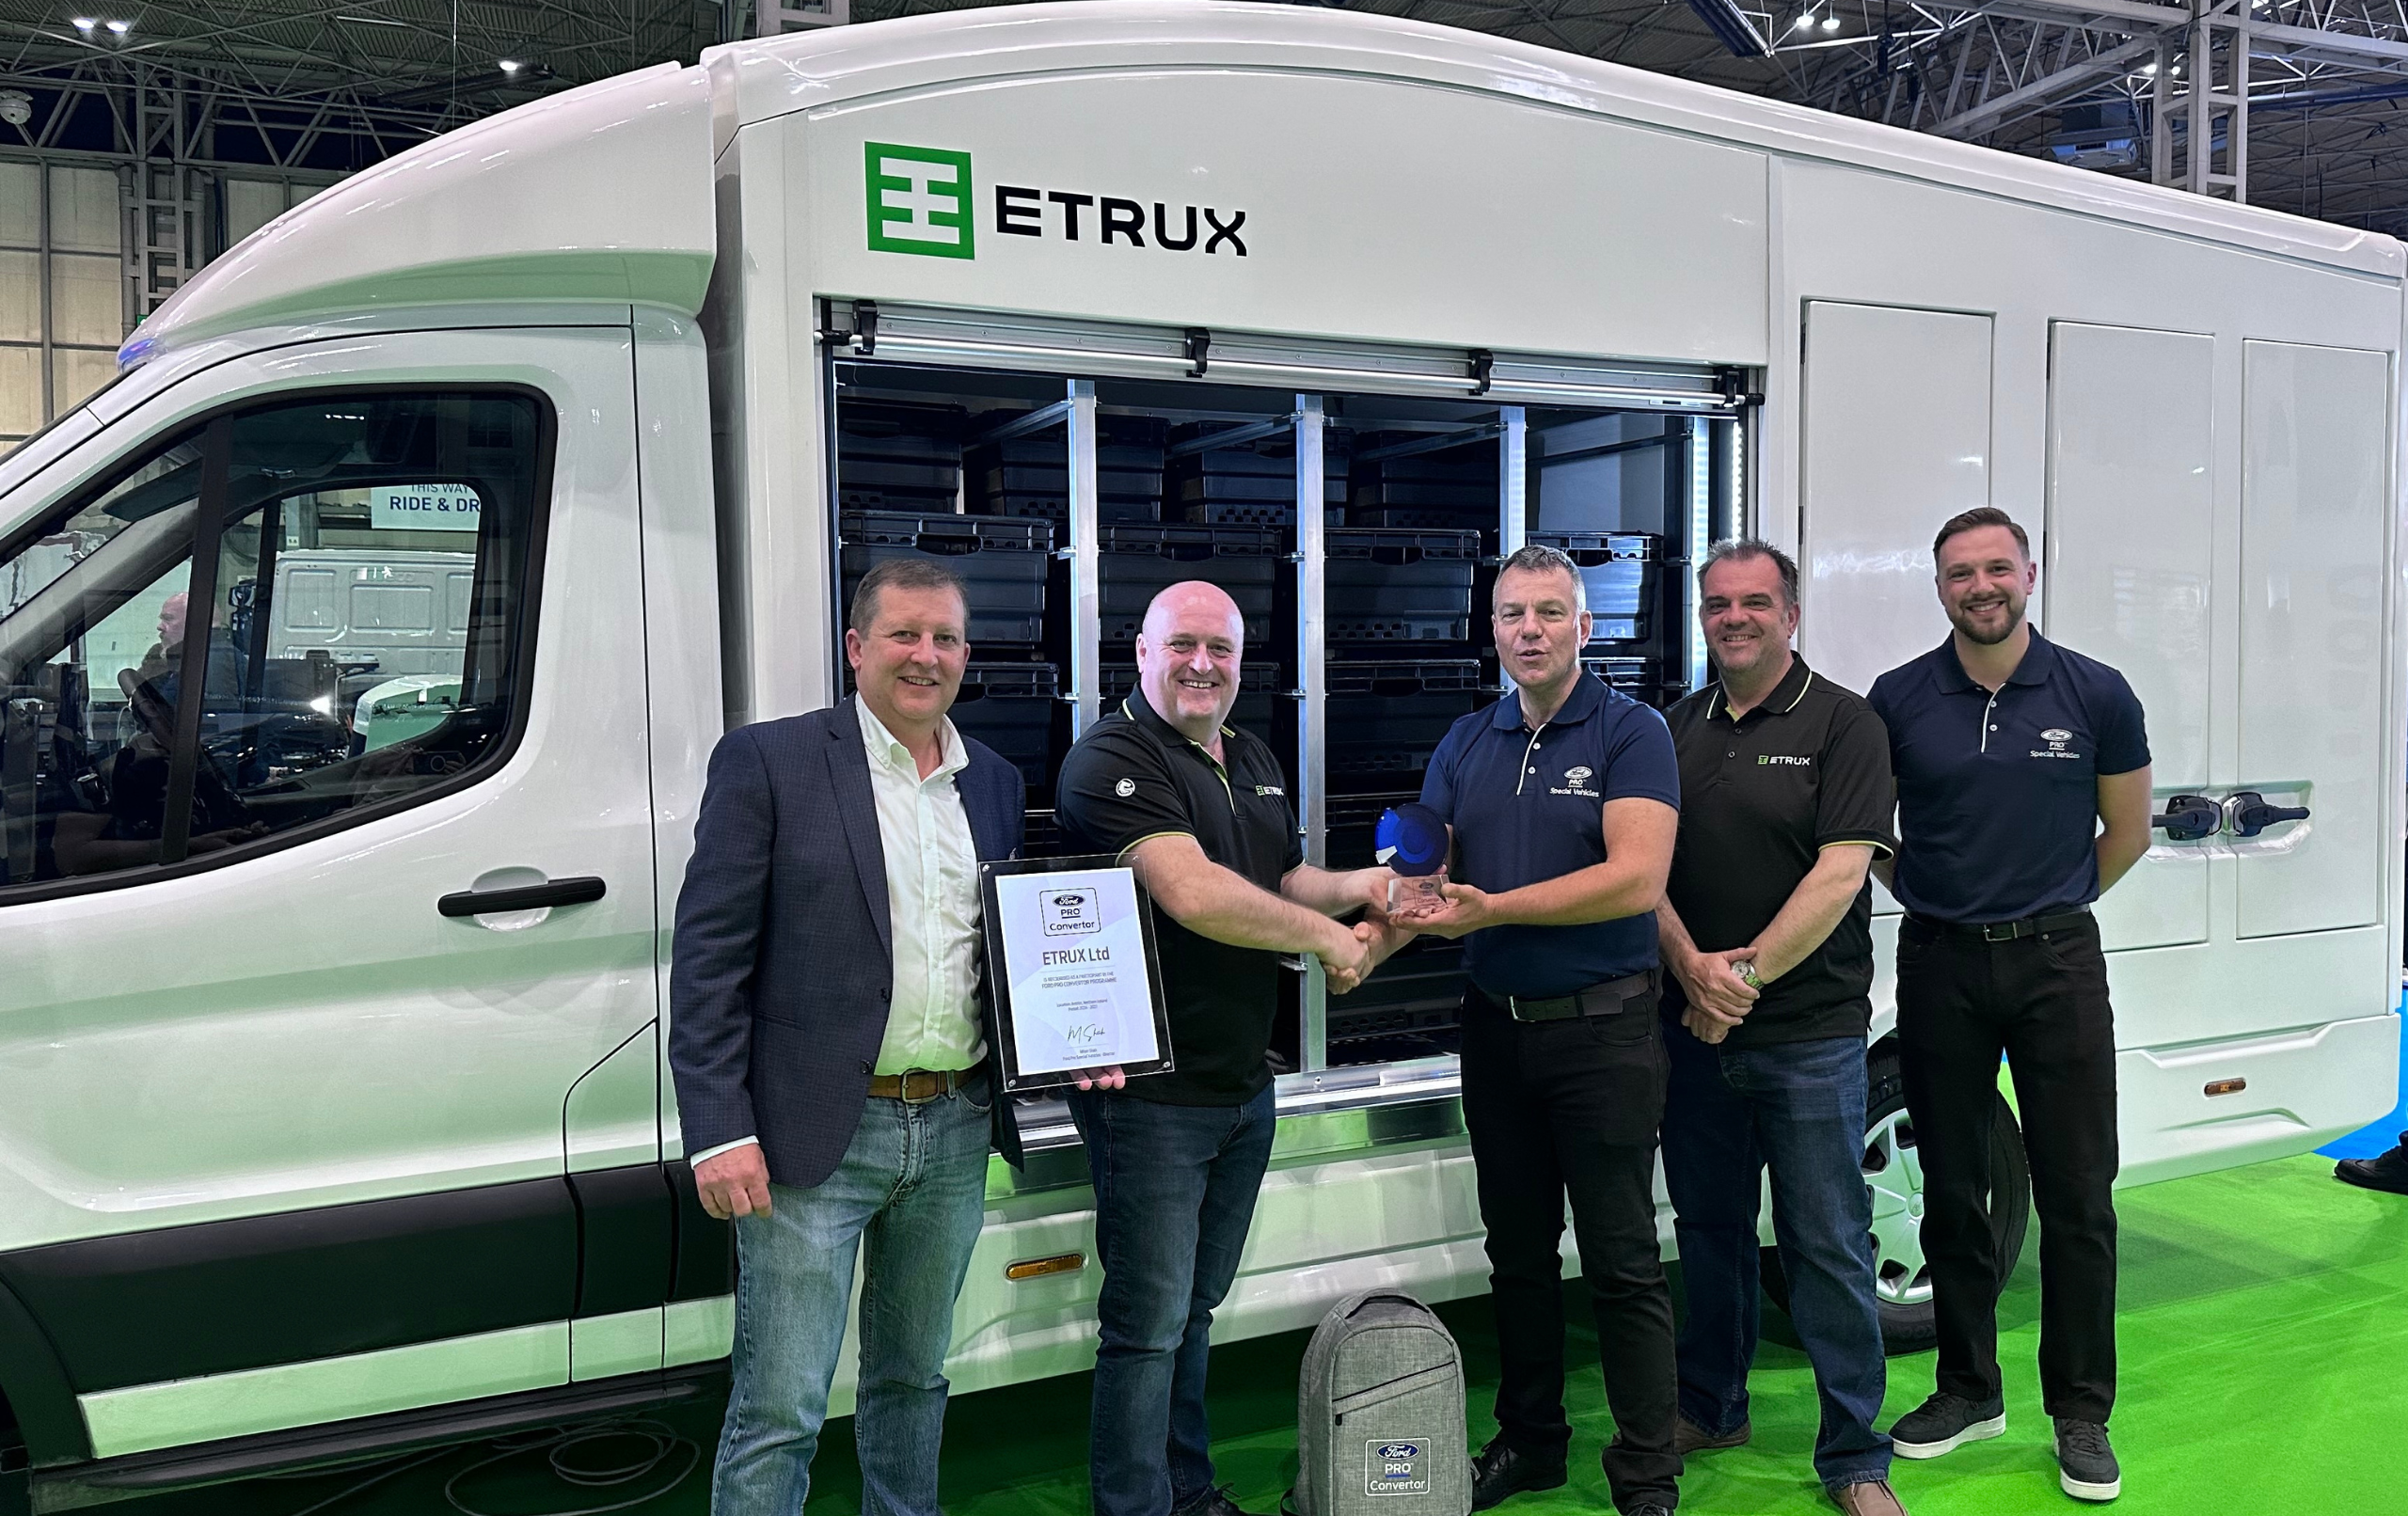 ETRUX Launches Fully Electric Ford E-Transit Trizone Vehicle at CV Show